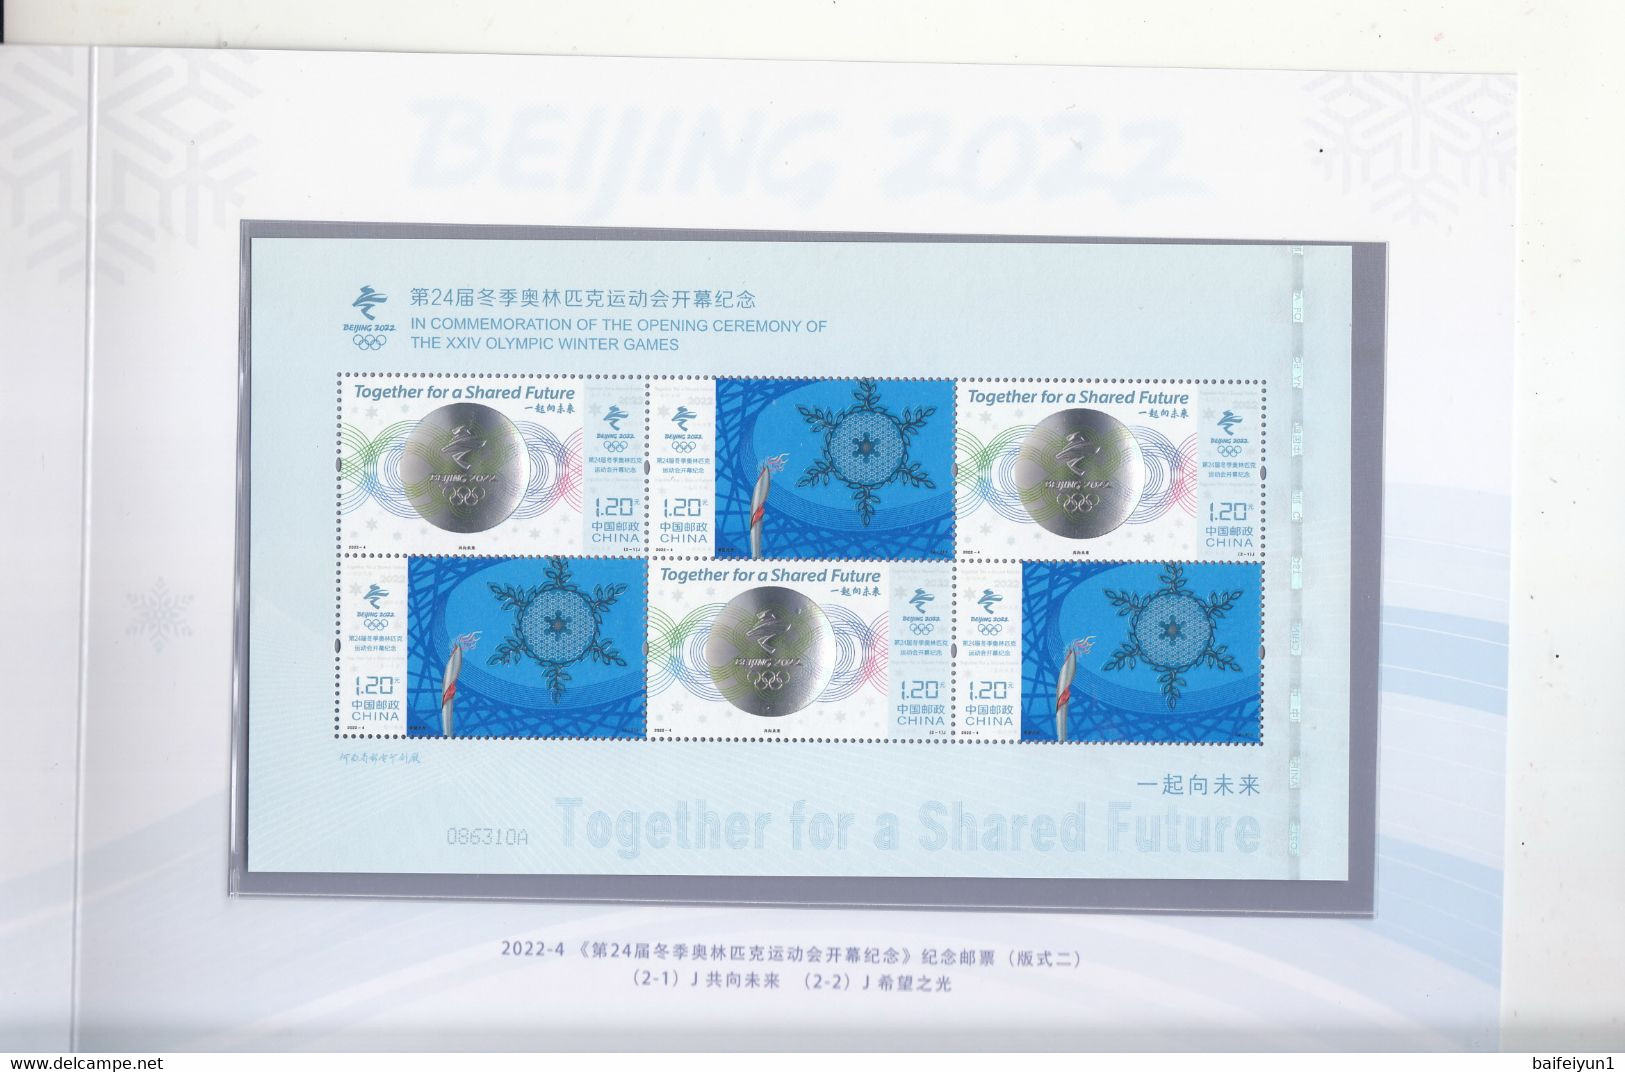 China 2022-4 The Opening Ceremony Of The 2022 Winter Olympics Game Stamps 2v(Hologram) Special Sheetlet Folder - Holograms